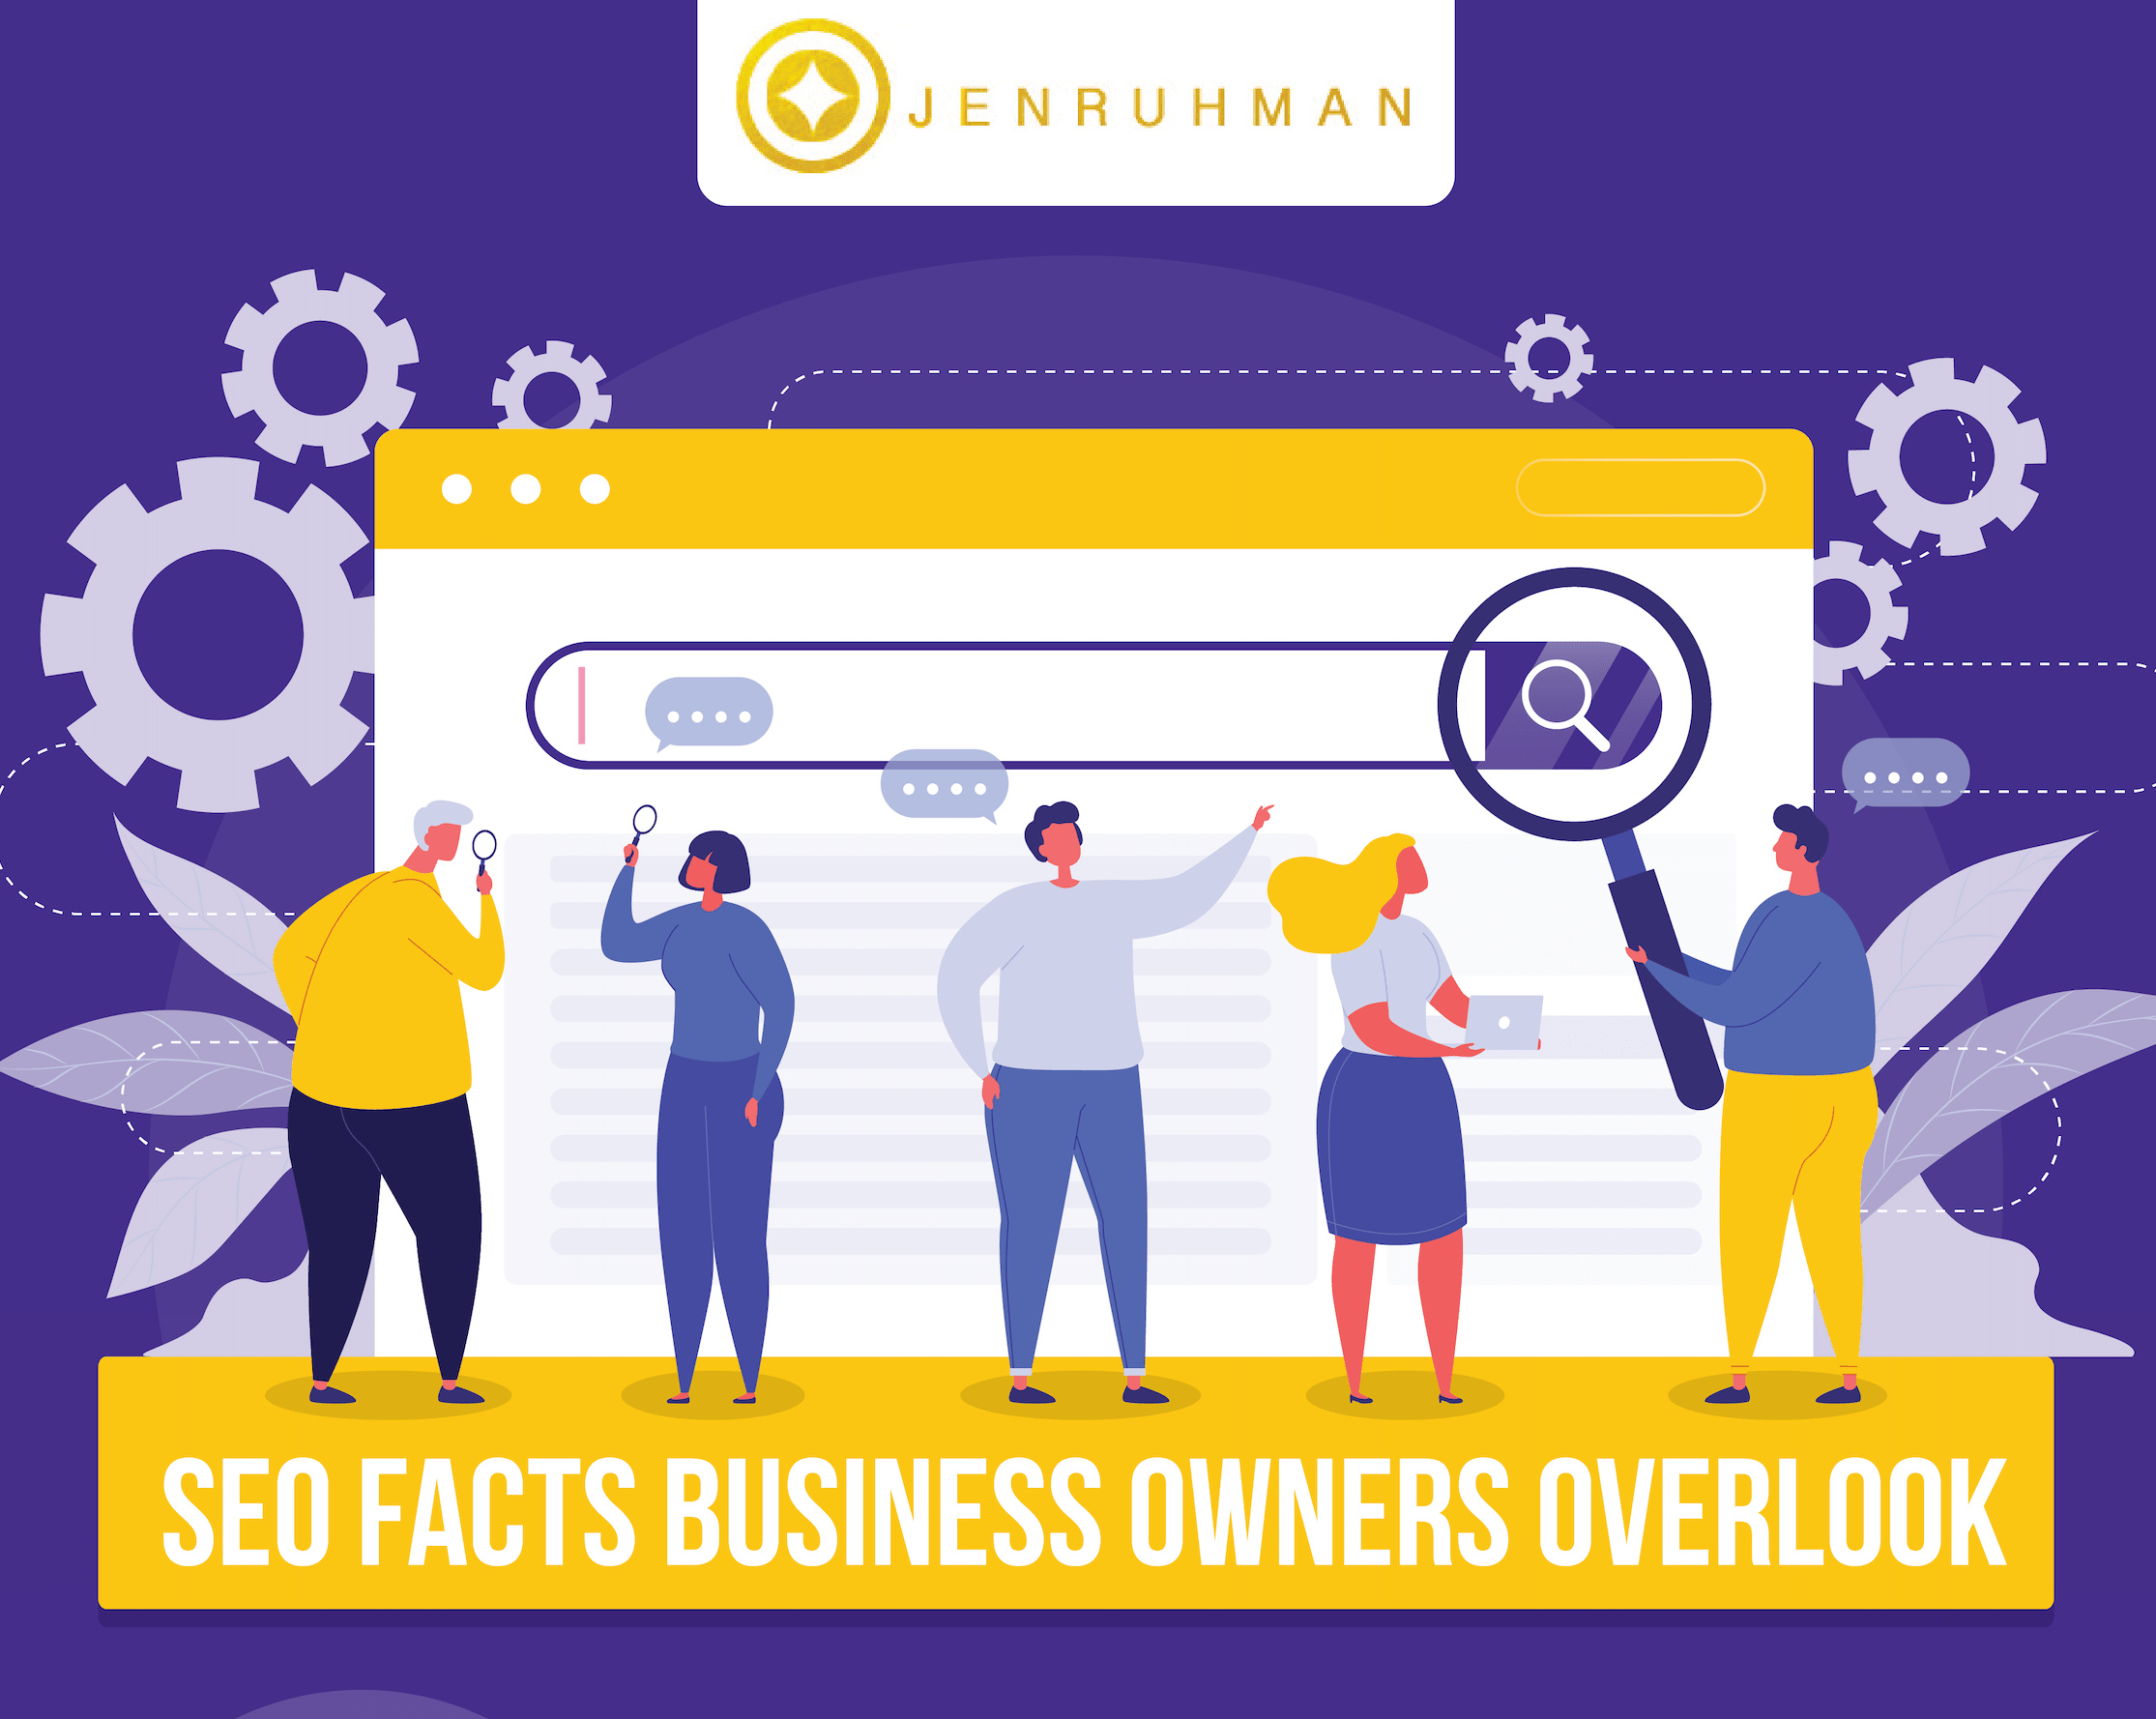 SEO Facts Business Owners Overlook